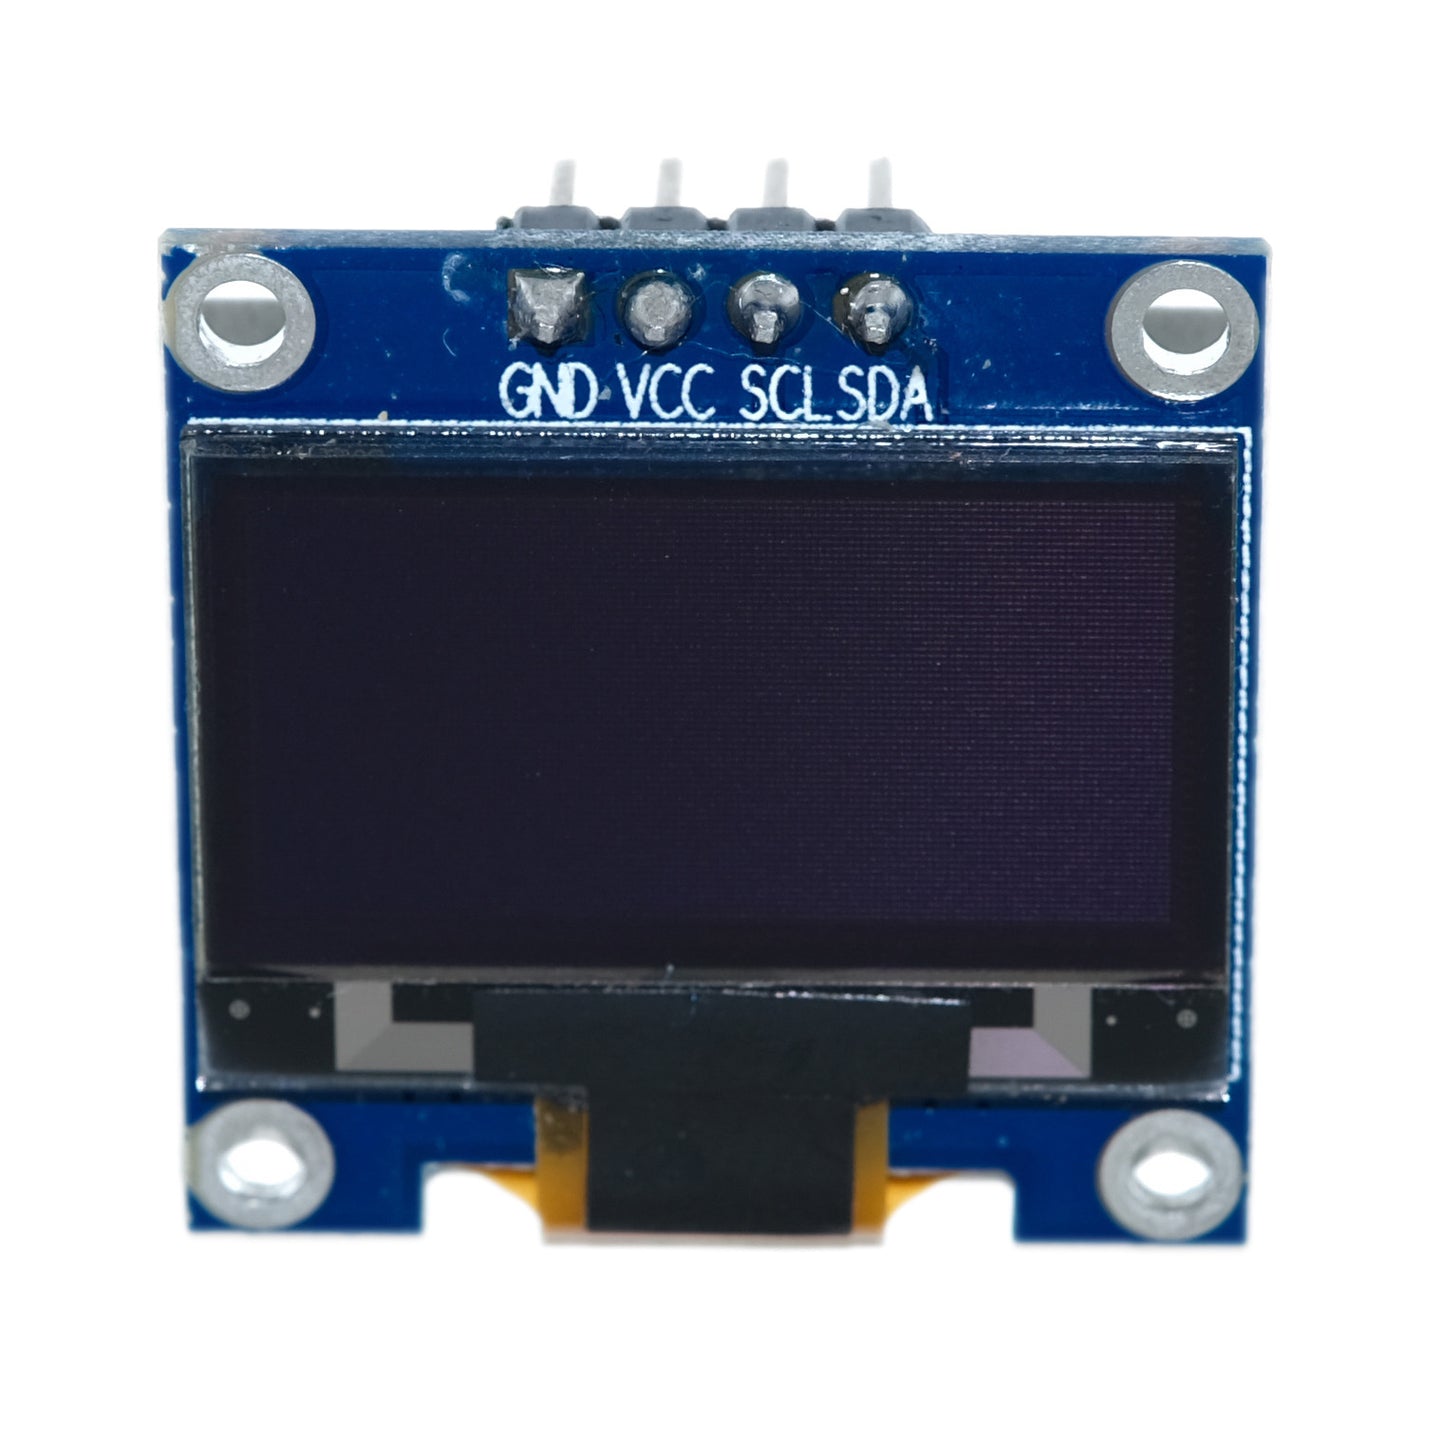 0.96-inch OLED Graphic Display Module with 128x64 resolution, supporting SPI and I2C interfaces